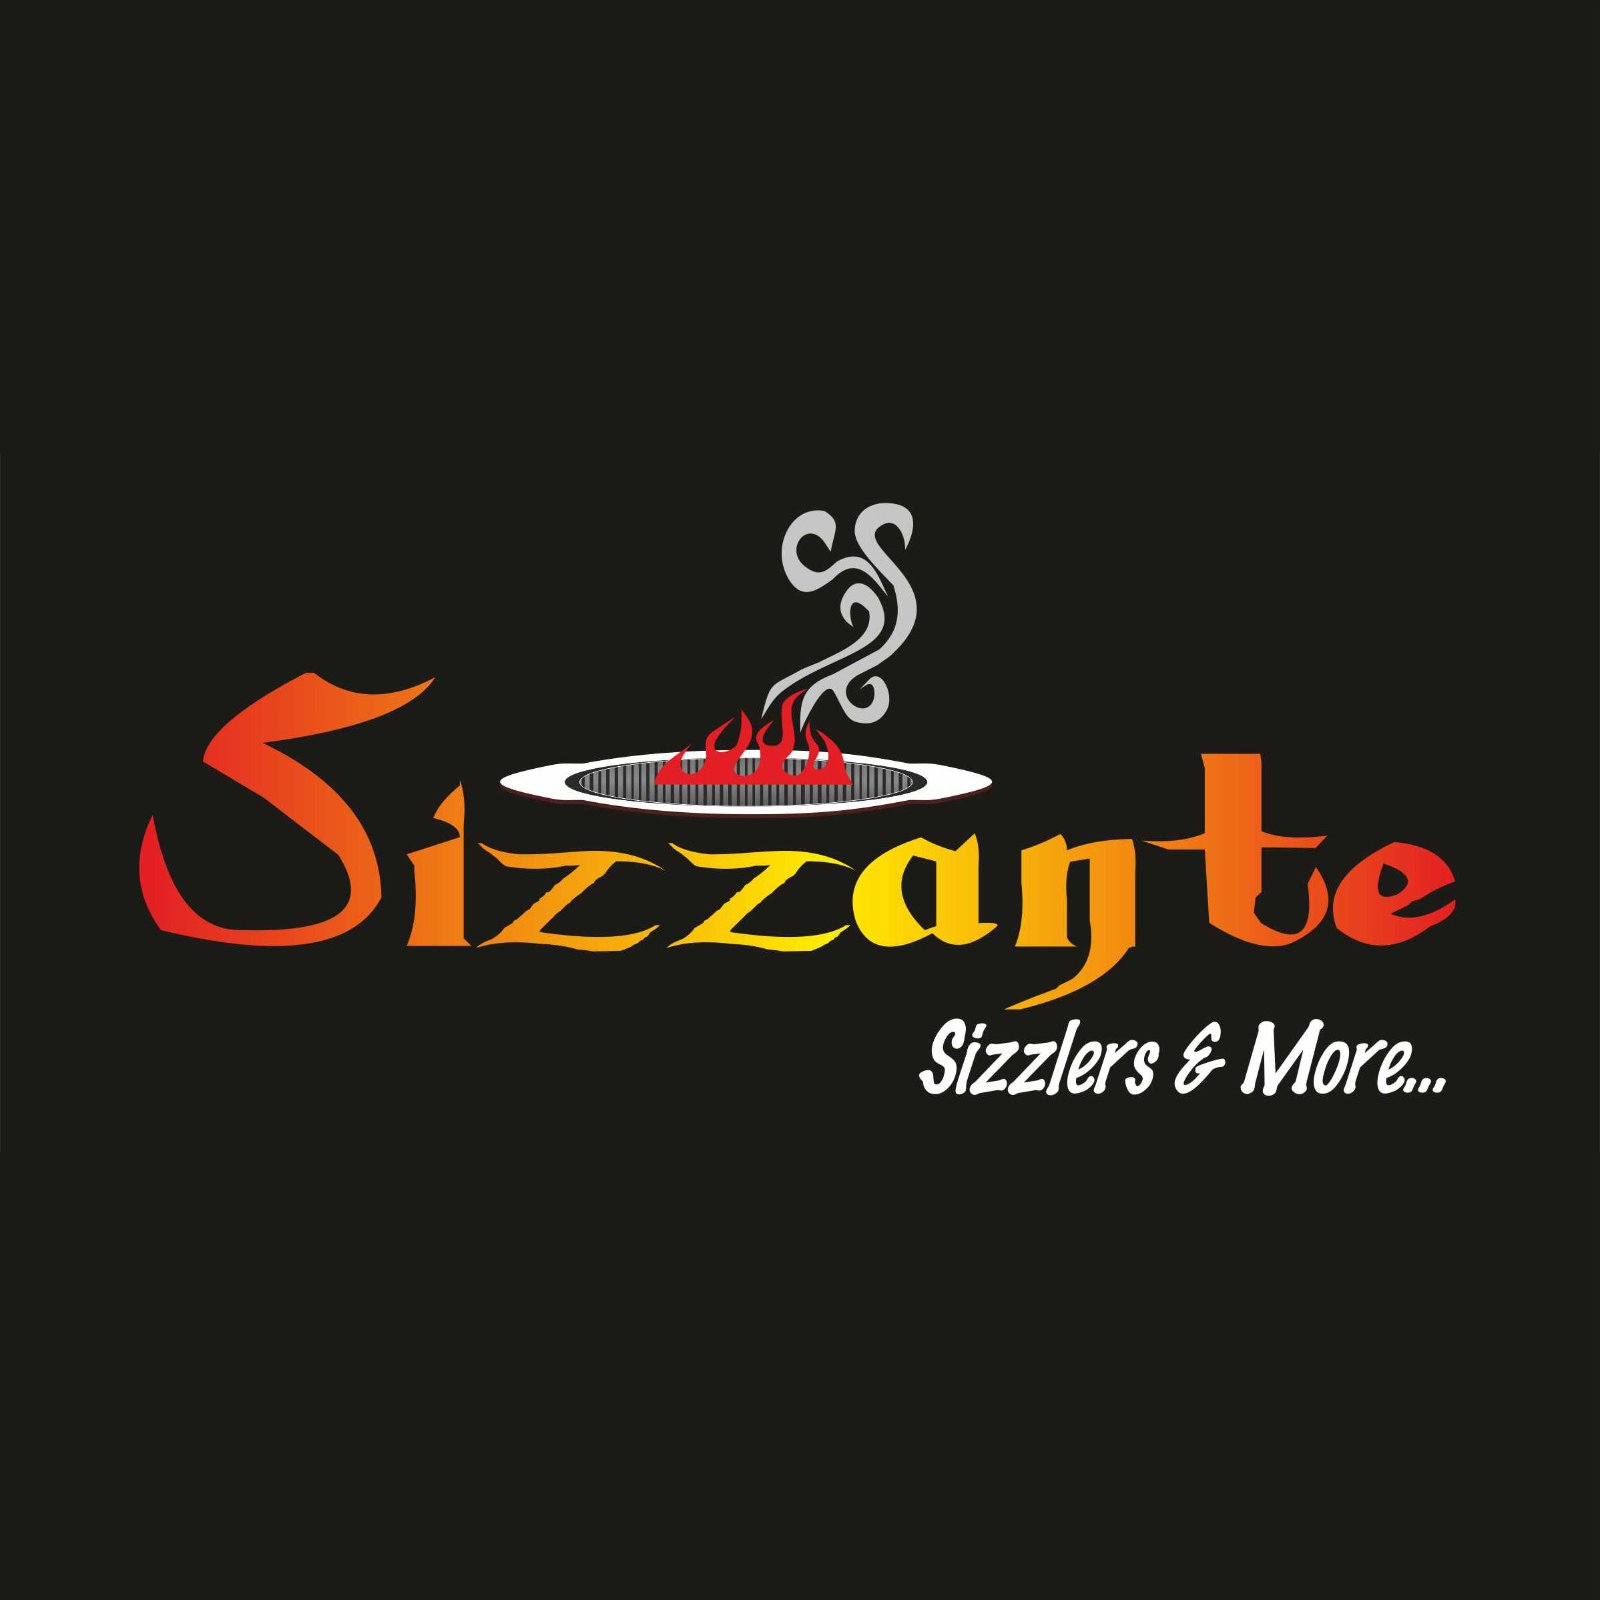 Sizzante Sizzlers & more.. is a road way to paradise where friends, family, food, and laughter combine together to form a divine experience.